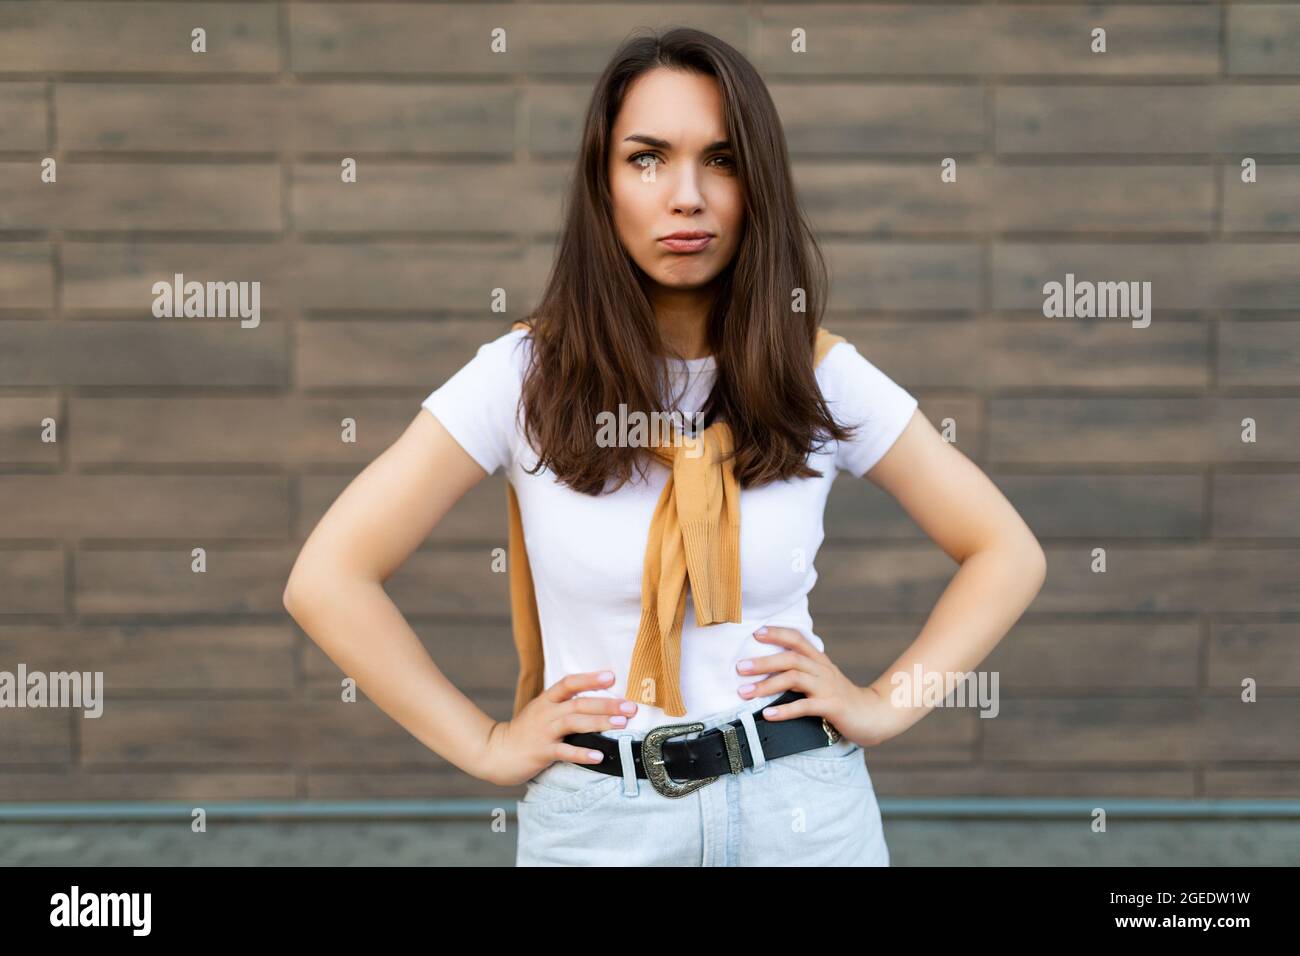 Portrait of touchy sad upset offended resentful young brunet woman wearing casual white t-shirt and jeans with yellow sweater poising near brown wall Stock Photo